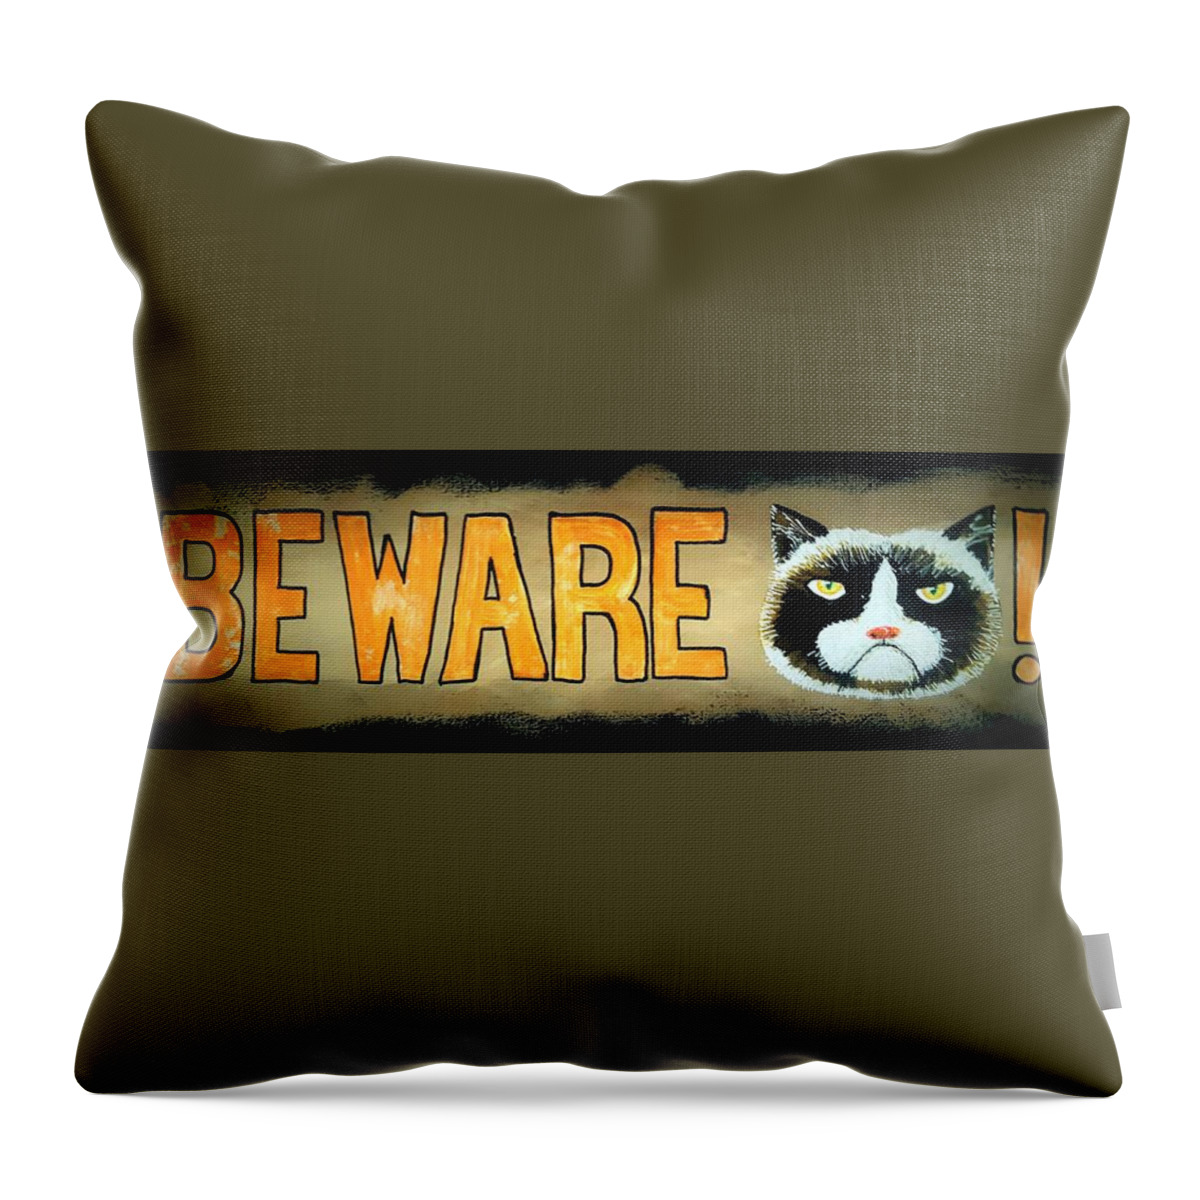 Beware! Throw Pillow featuring the painting Beware by Jim Harris